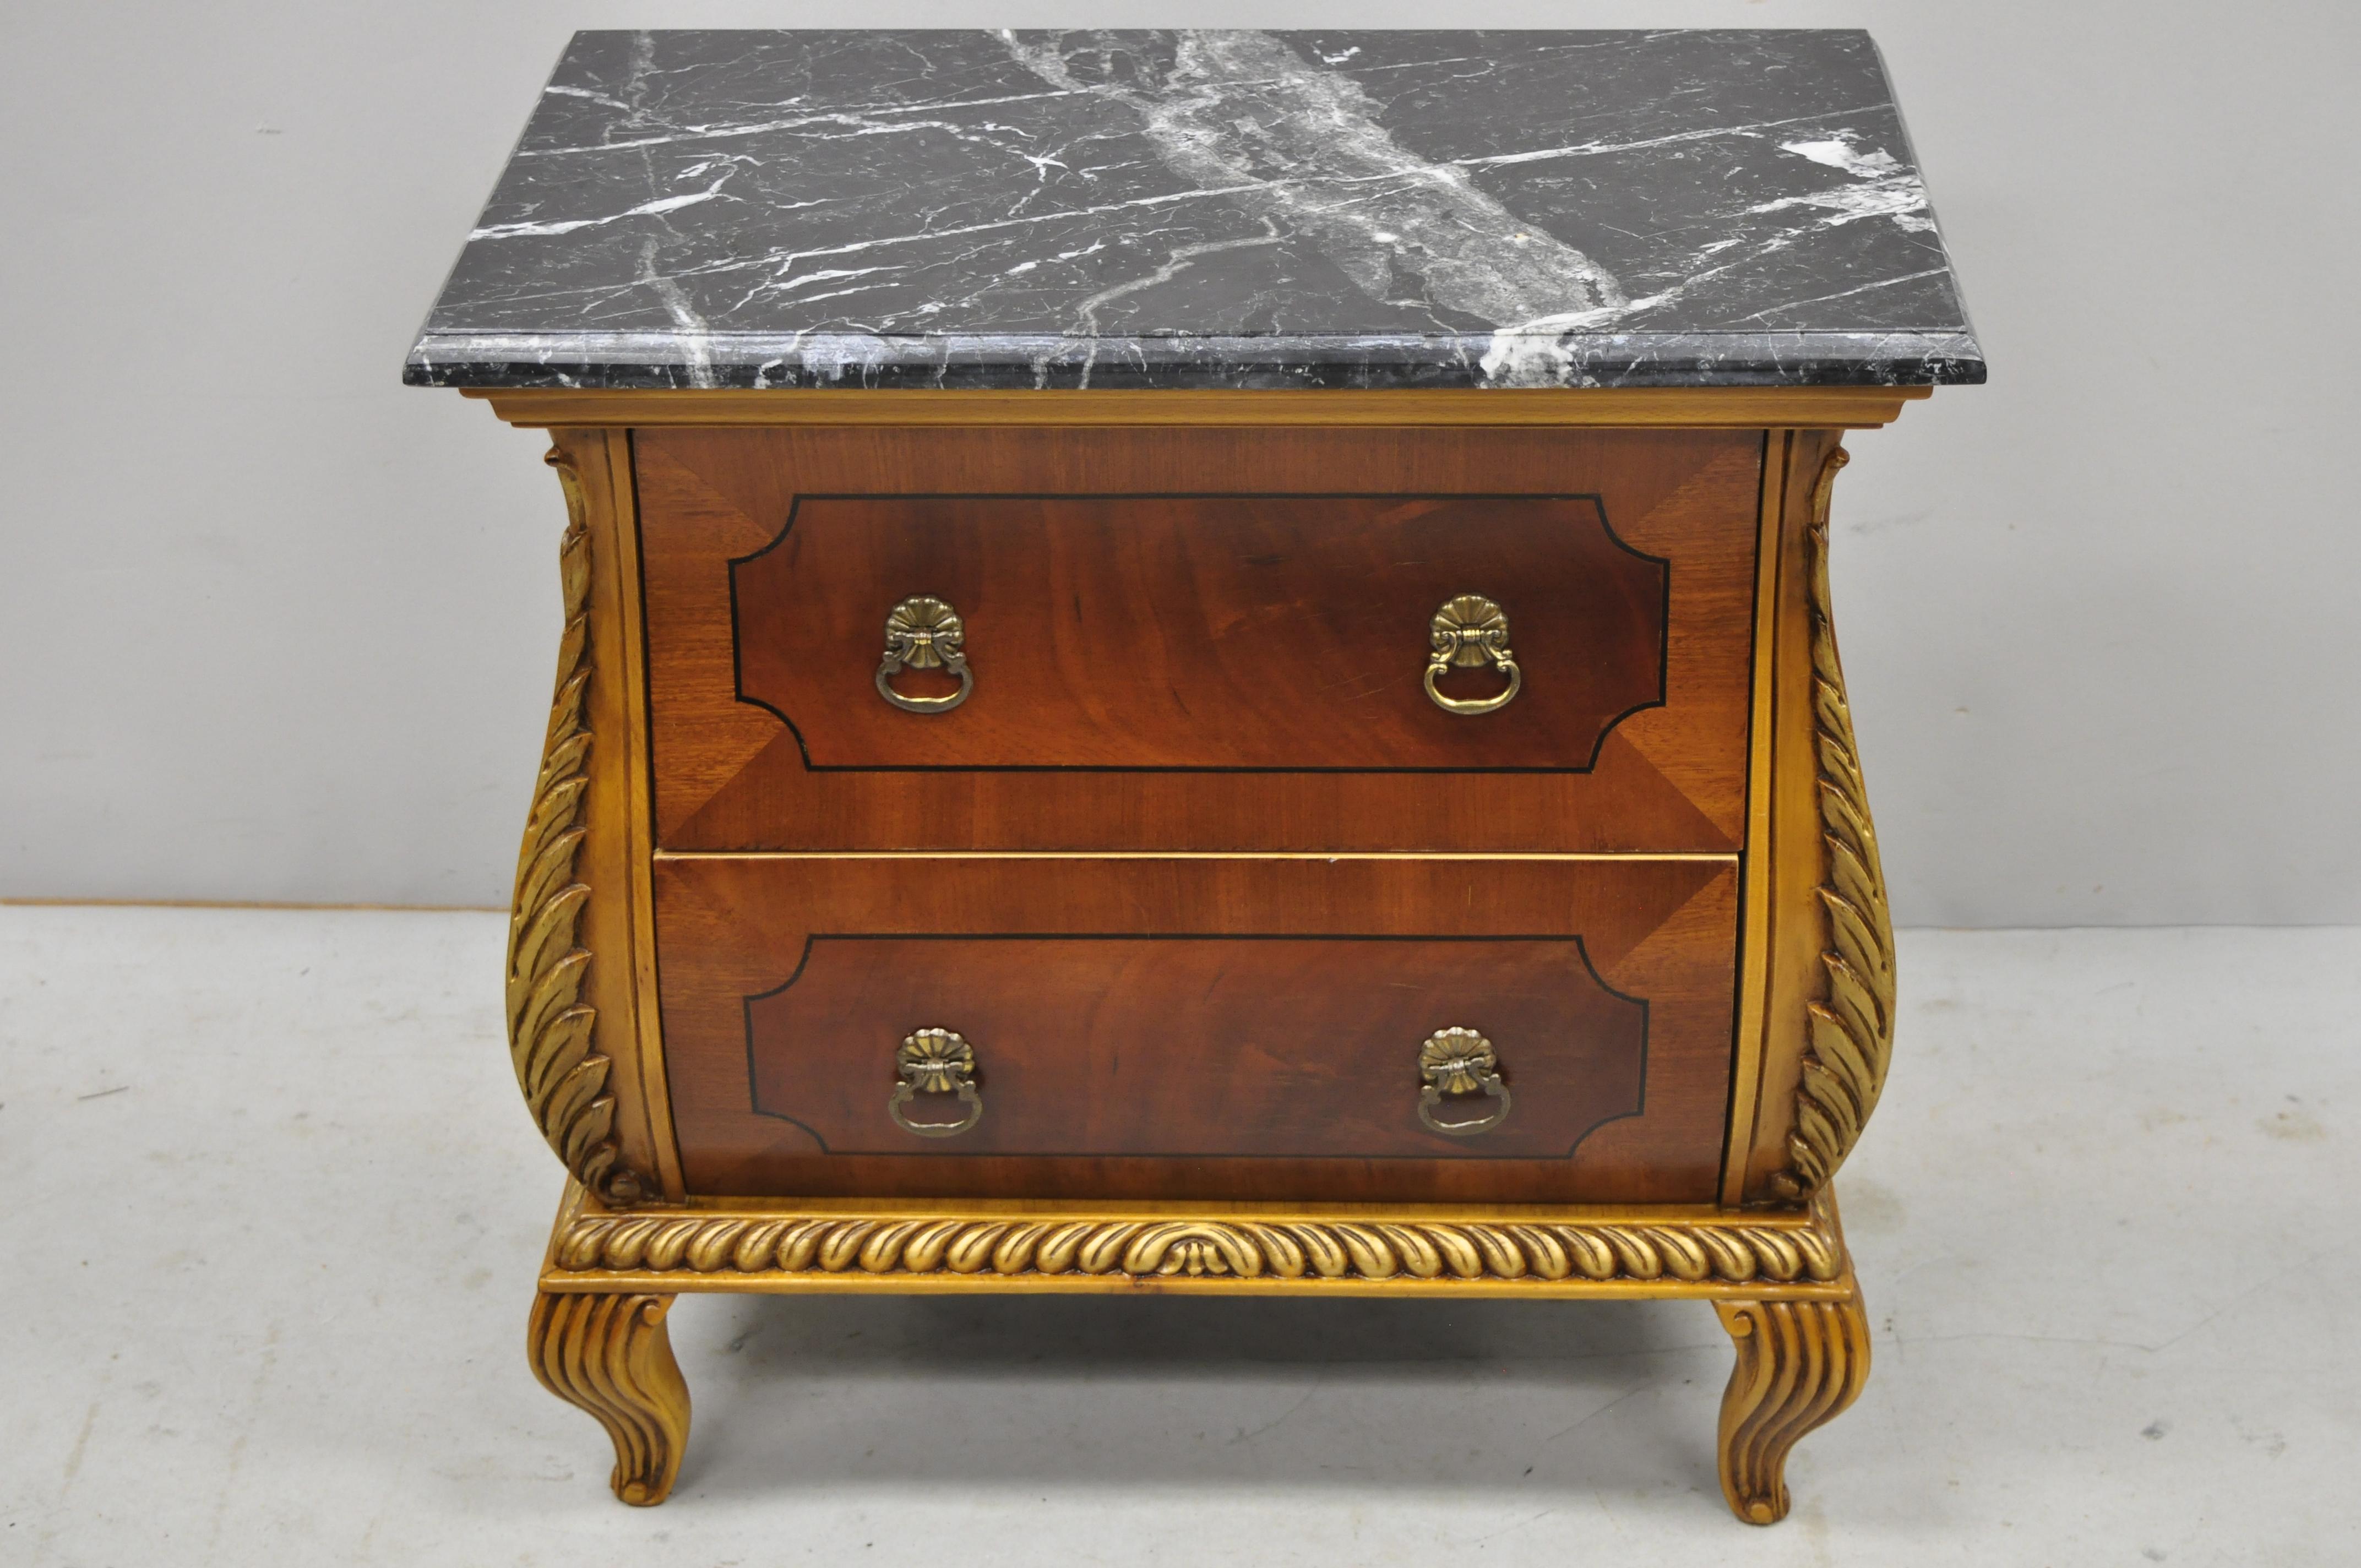 Vintage Italian marble top small French Louis XV style bombe commode chest. Item includes a marble top, small unique size, solid wood construction, beautiful wood grain, 2 dovetailed drawers, cabriole legs, quality craftsmanship, great style and